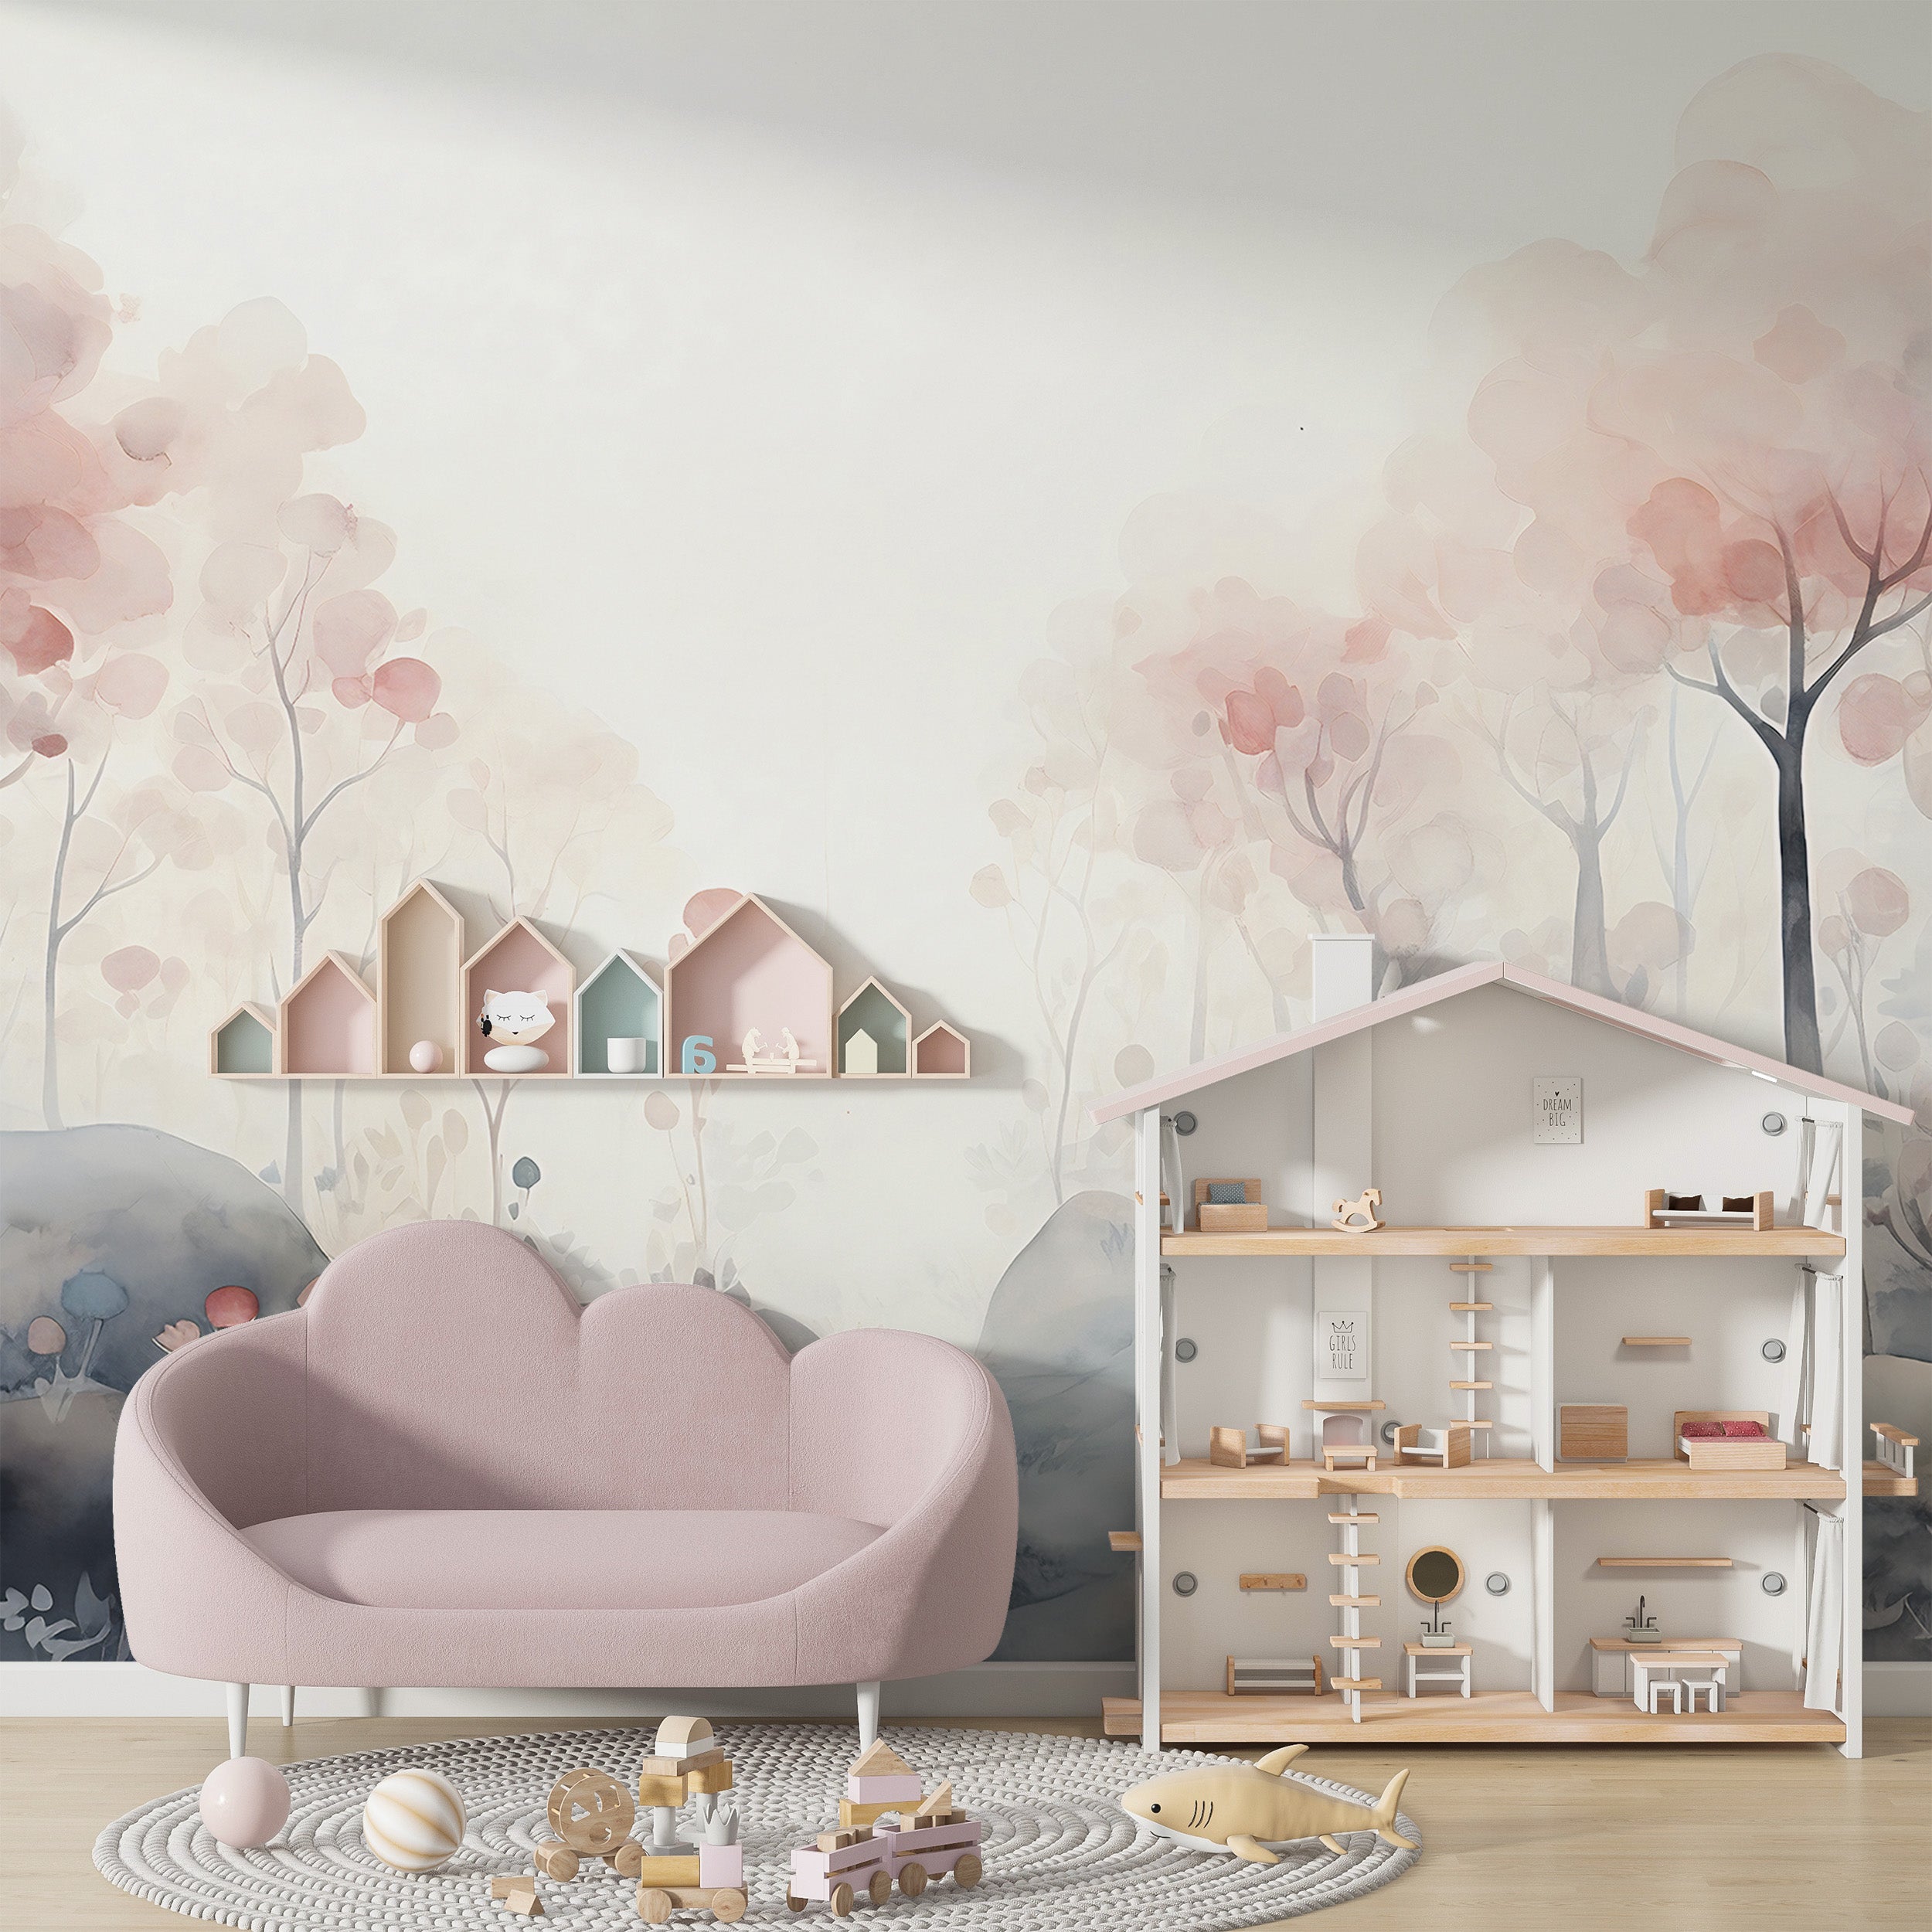 Redefine Space with Enchanting Wall Decor